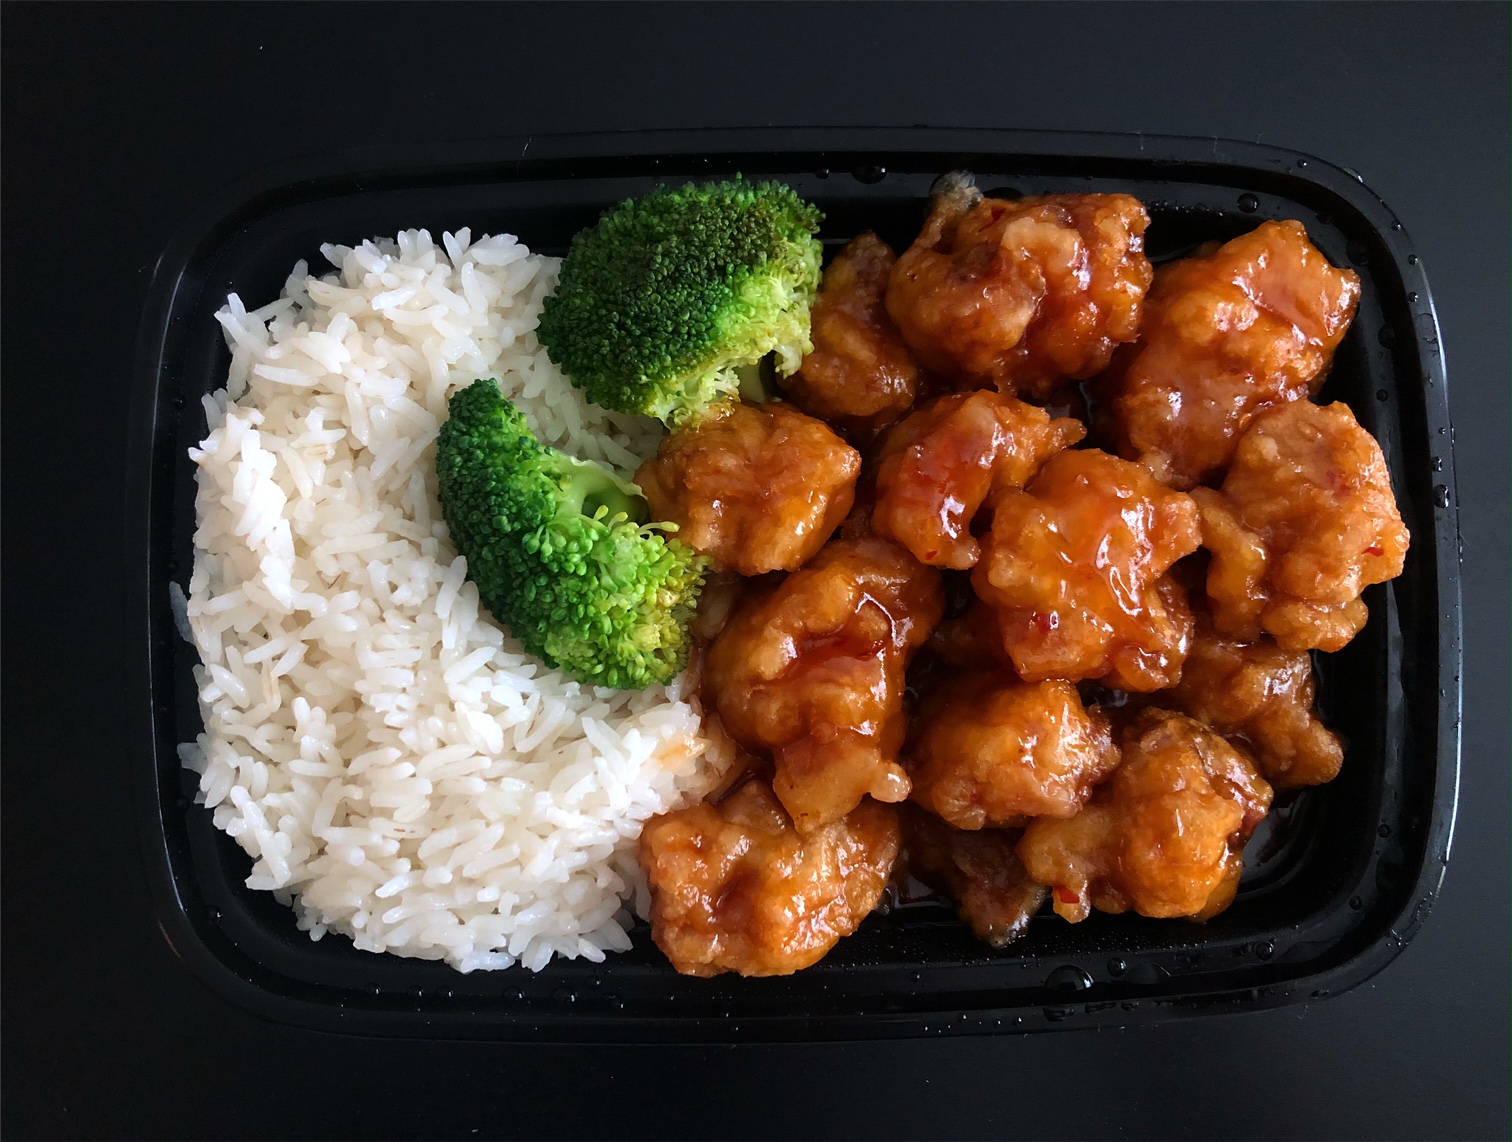 In a black plastic takeout container, there is white rice on the left side with broccoli bites beside and then a half container full of General Tso chicken. Photo by Alyssa Buckley.